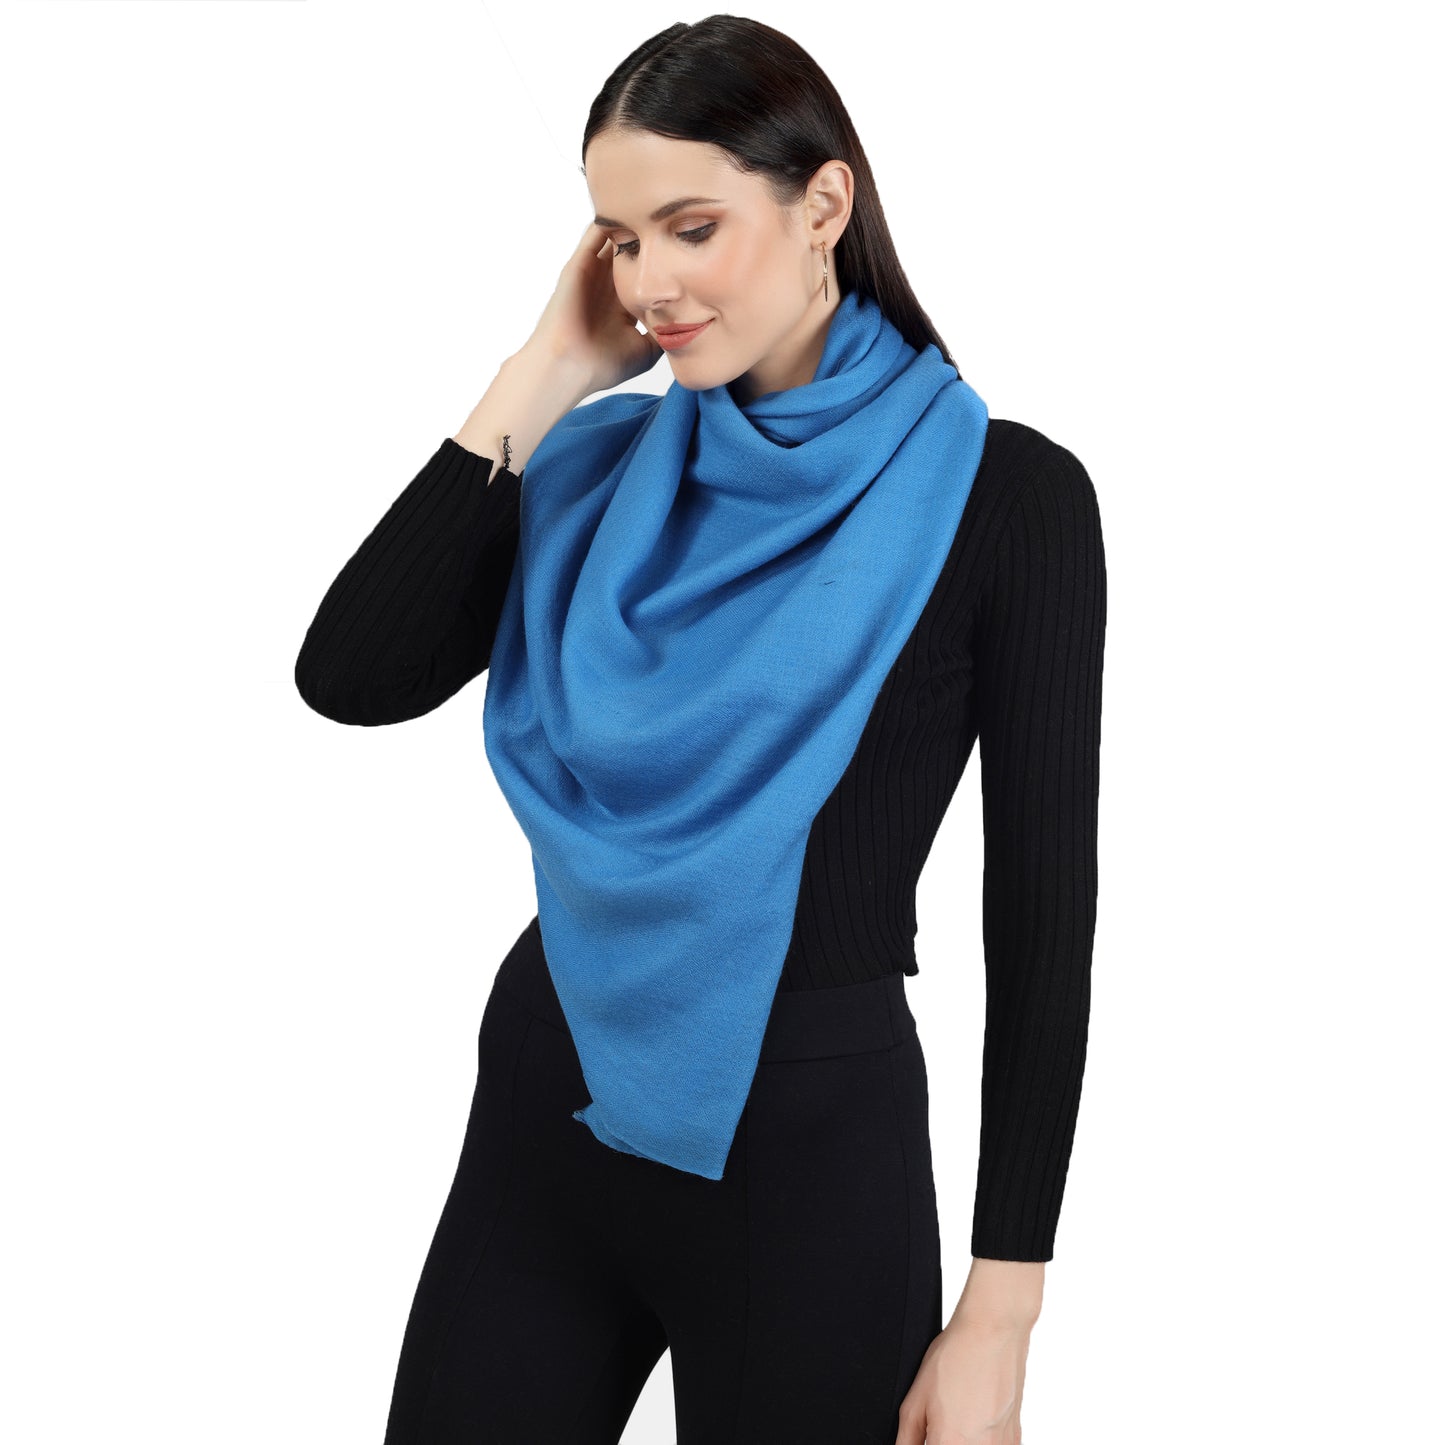 Image of a woman wearing a blue cashmere scarf wrapped around her neck in a stylish and elegant way. The scarf is neatly folded and draped around her neck, with one end slightly longer than the other, adding a touch of asymmetry to the look. The blue color adds a pop of color to the woman's outfit, and the soft and luxurious texture of the scarf is visible in the image. The woman's expression is confident and poised, with a subtle smile on her lips.